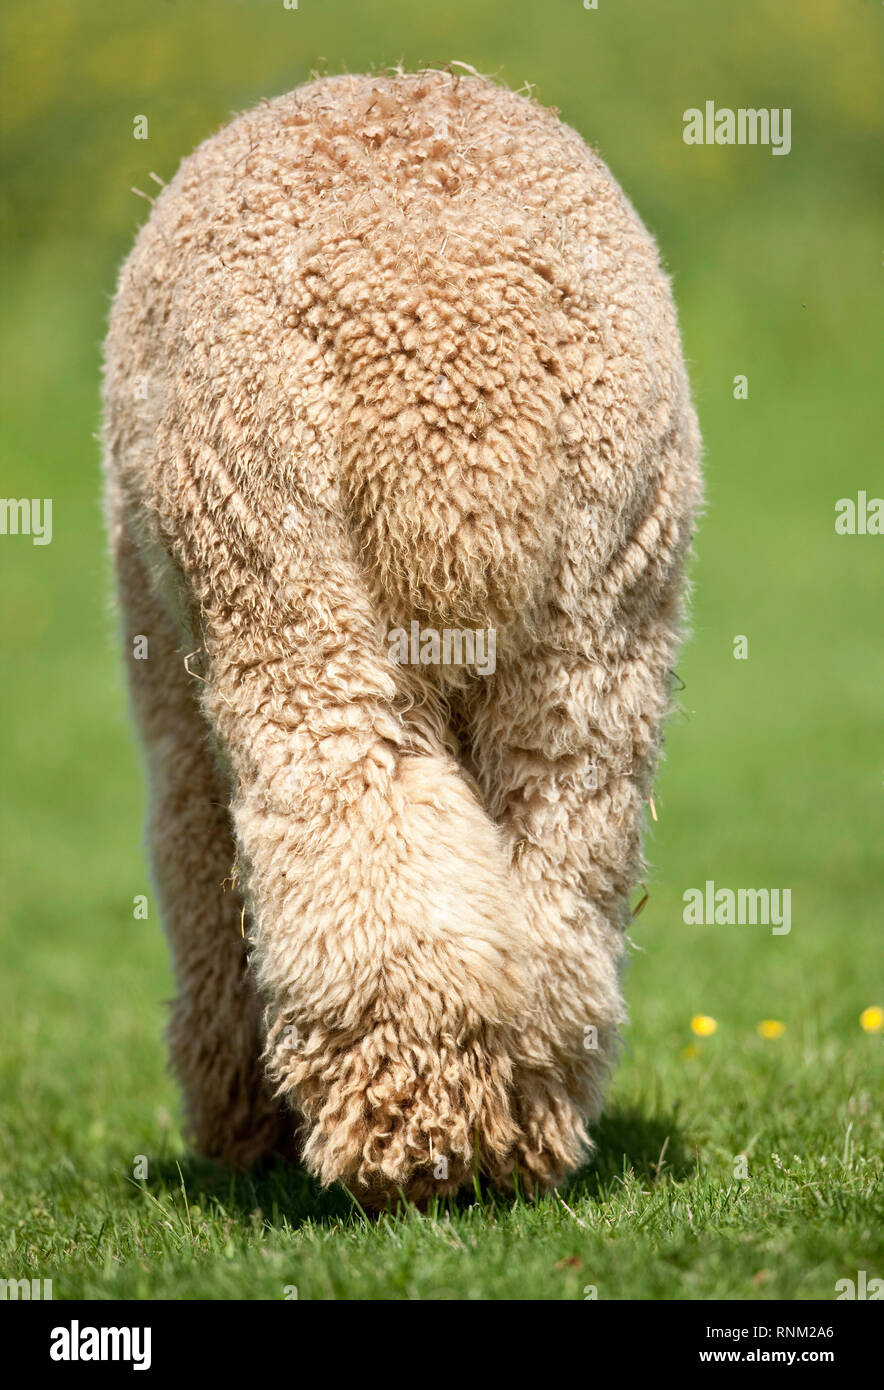 Alpaca (Vicugna pacos). Four on a pasture, seen from the rear. Germany Stock Photo